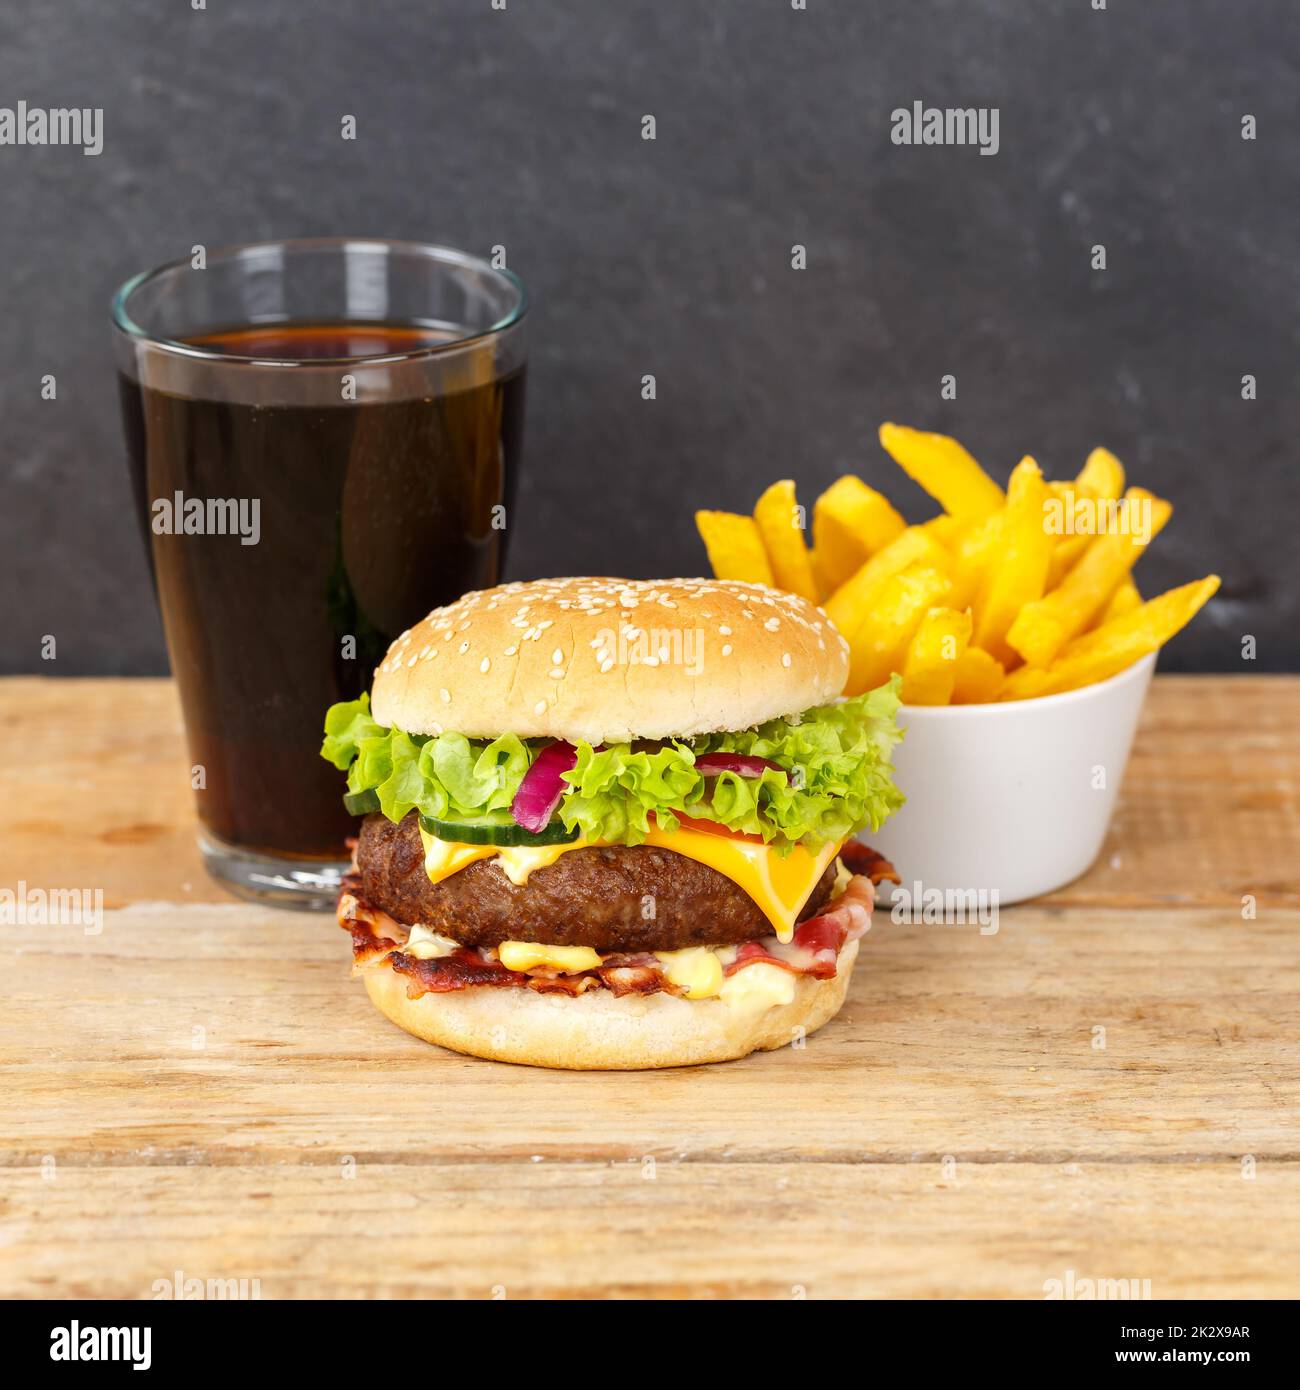 Hamburger Cheeseburger meal fastfood fast food with cola drink and French Fries on a wooden board square Stock Photo